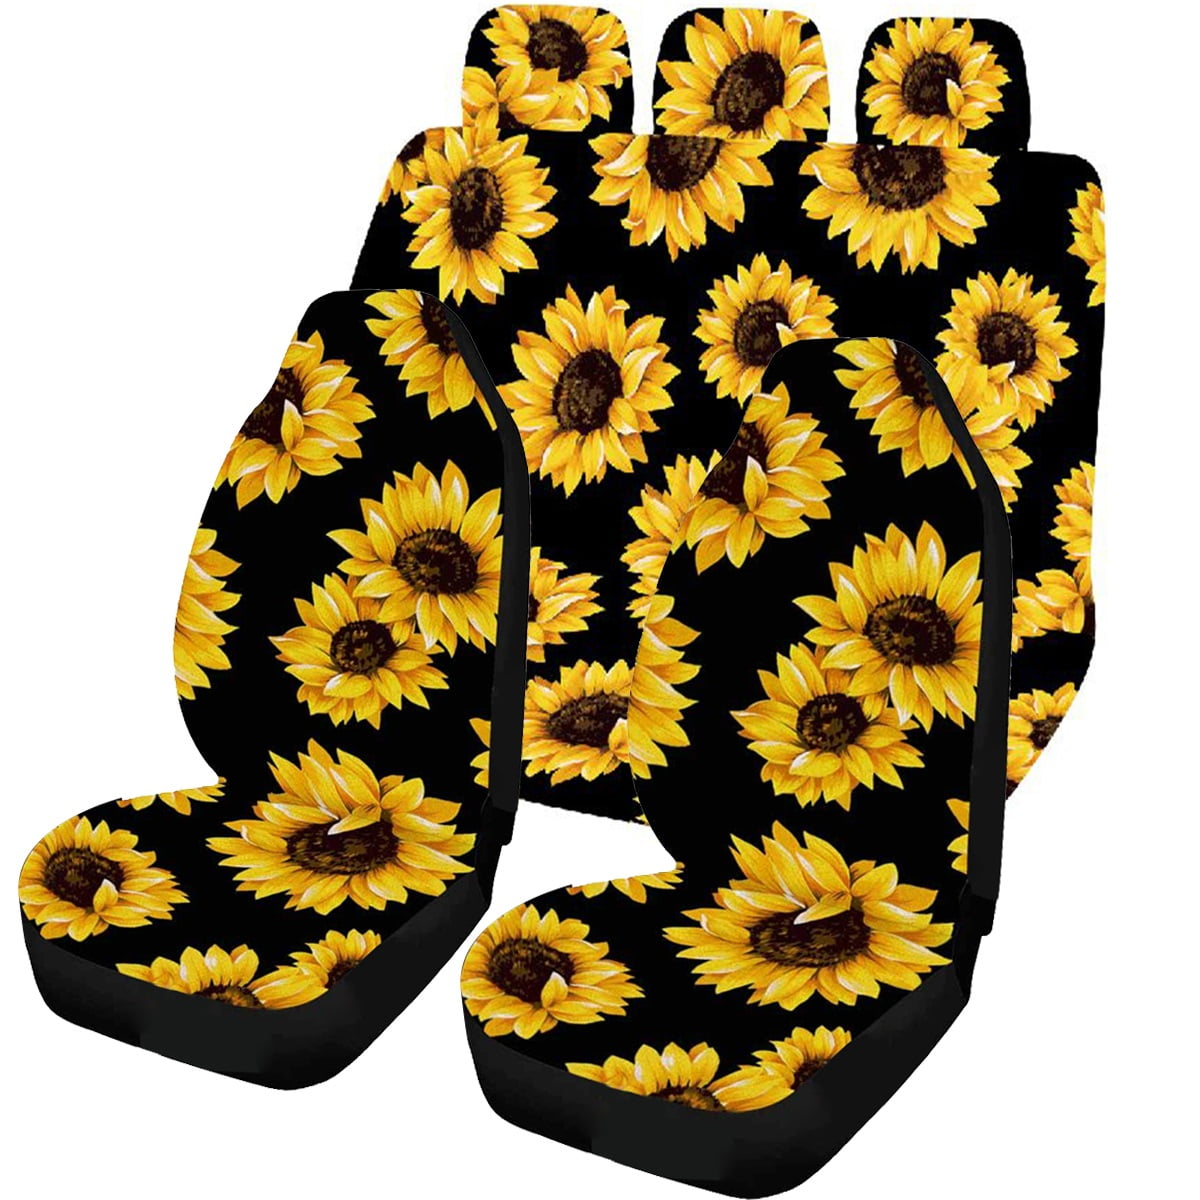 Set of 2 Front Floral Golden White Yellow Love Daisy Custom New Universal Fit Auto Drive Car Seat Covers Protector for Women Automobile Jeep Truck SUV Vehicle Full Set Accessories for Adult Baby 